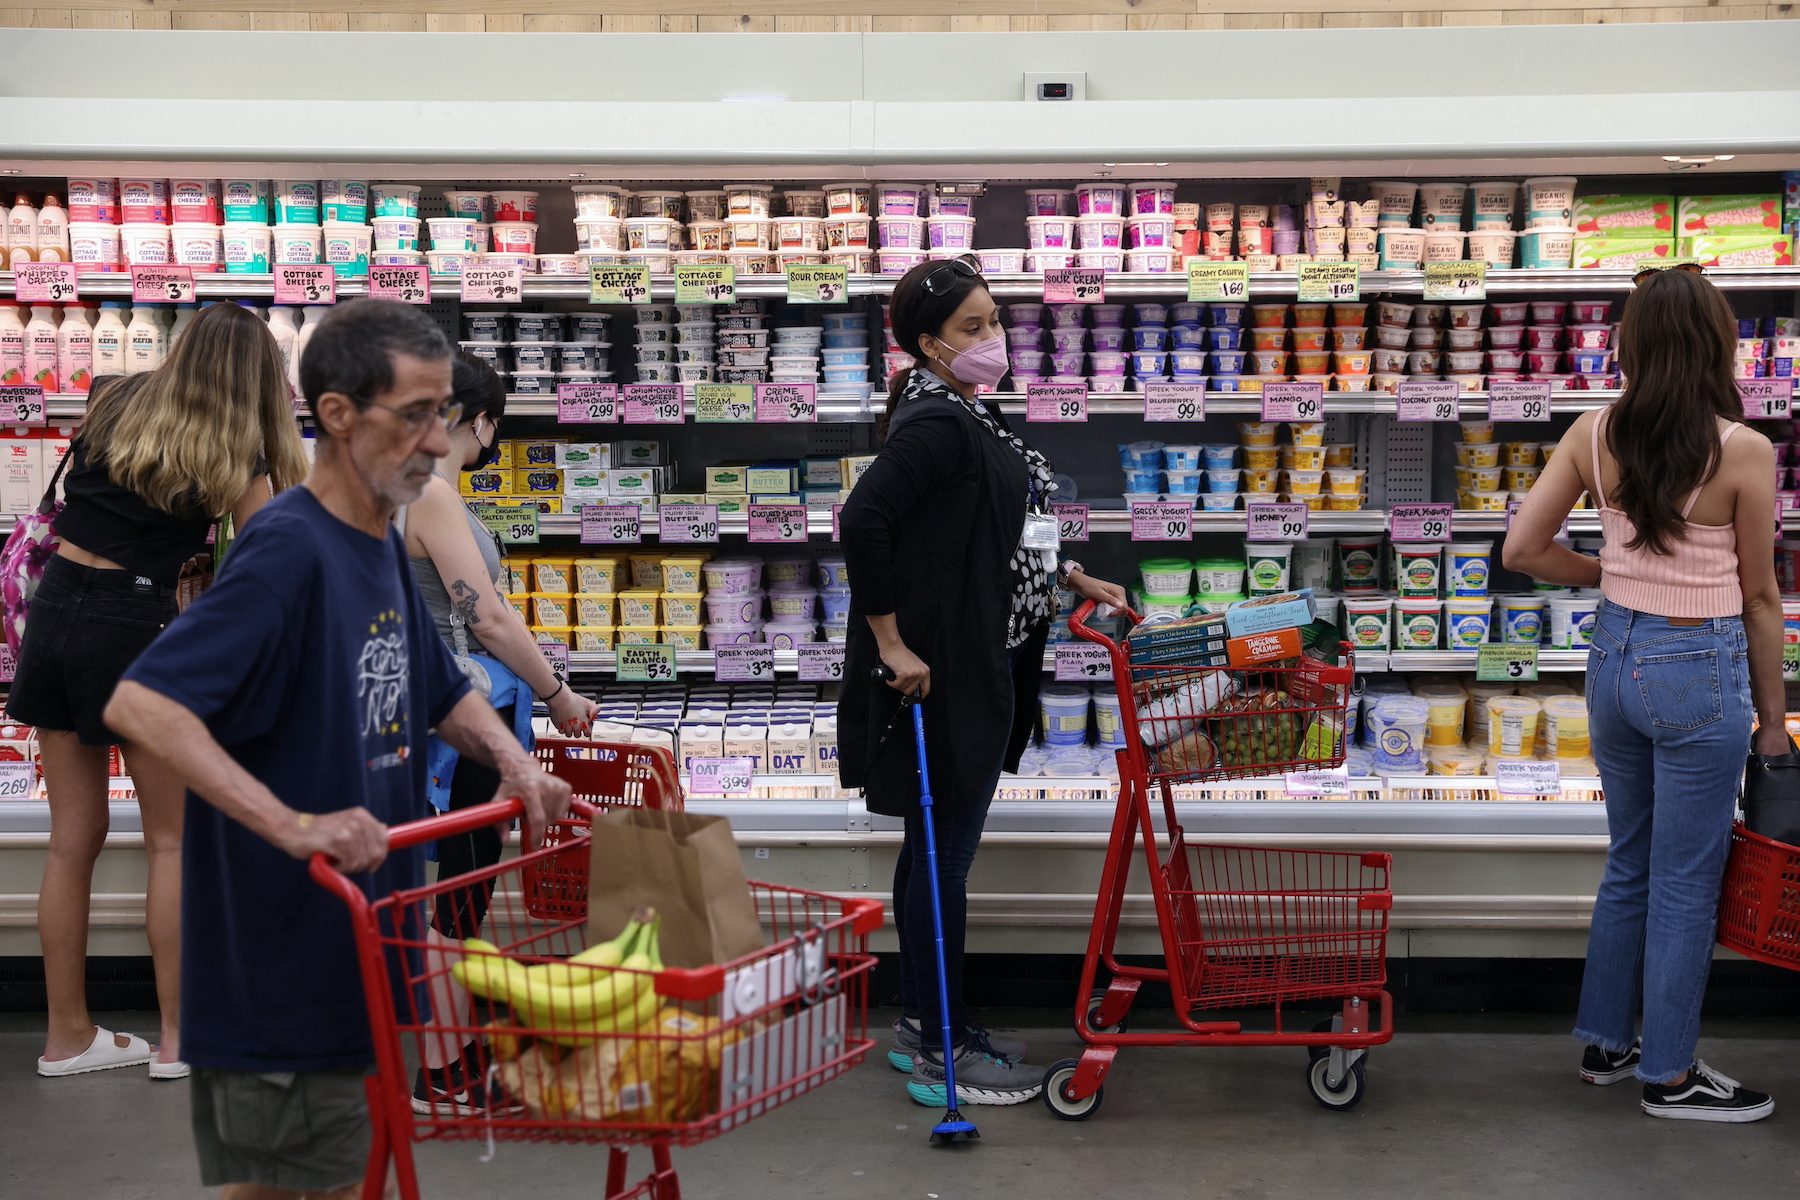 Americans feel the heat as US annual inflation posts largest gain since 1981